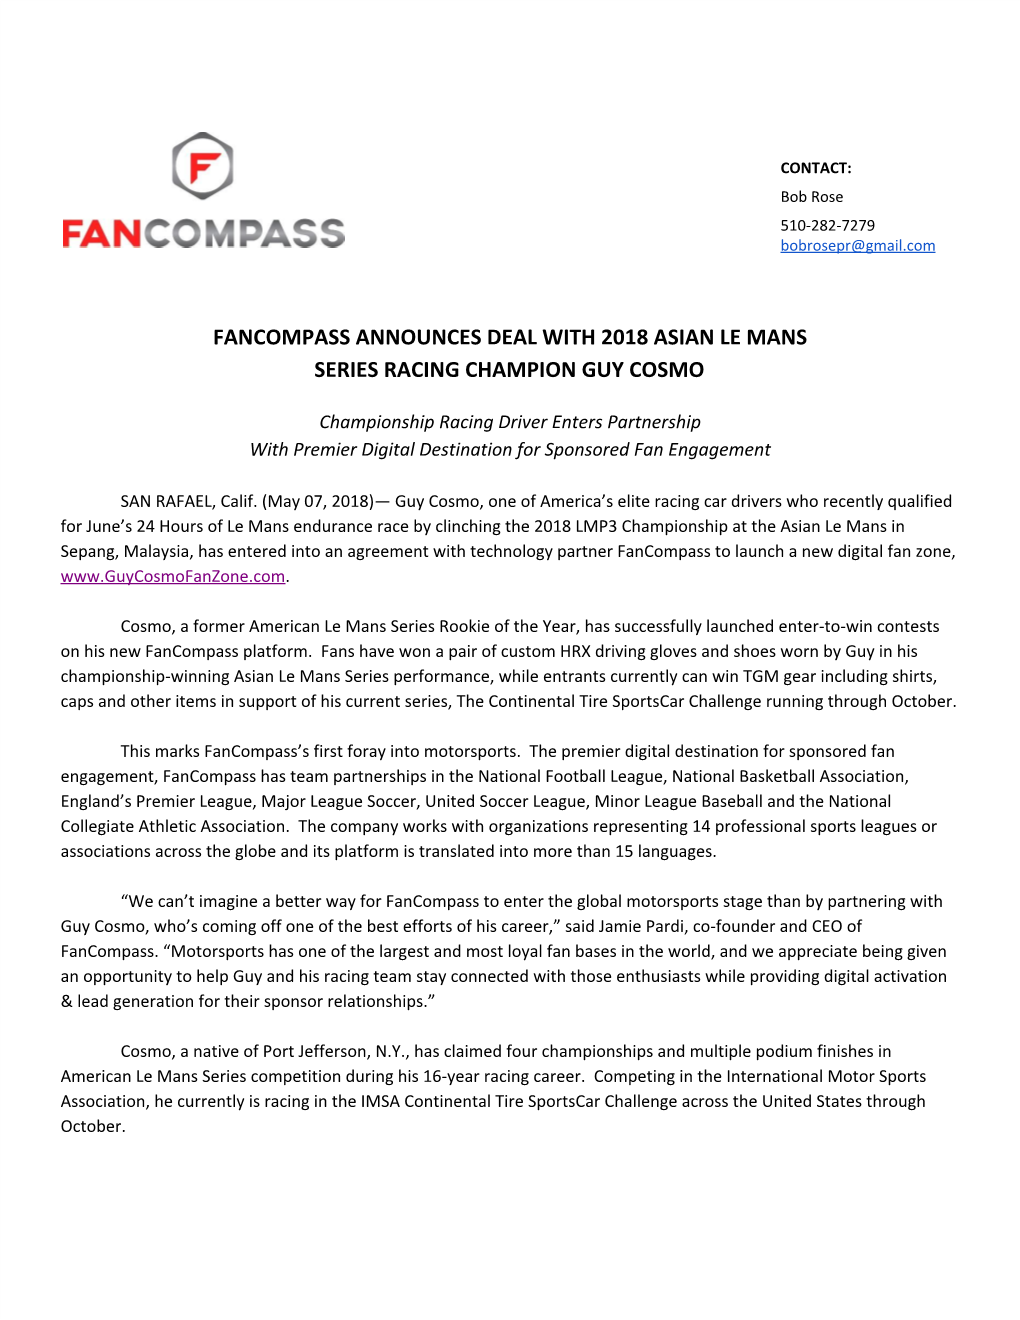 Fancompass Announces Deal with 2018 Asian Le Mans Series Racing Champion Guy Cosmo